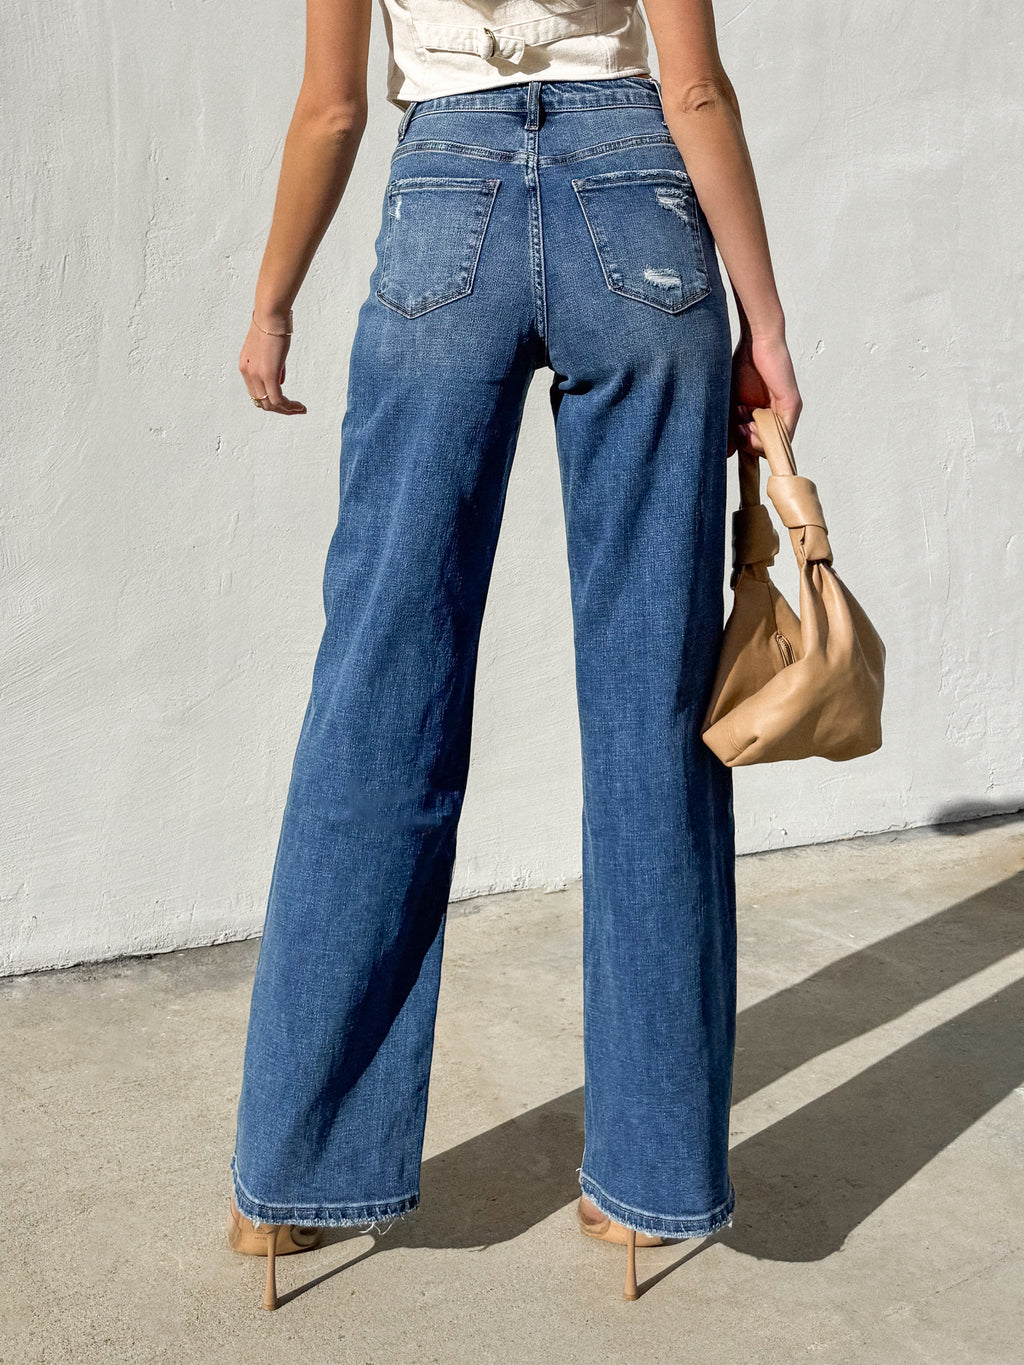 90's Vintage Jeans - Stitch And Feather